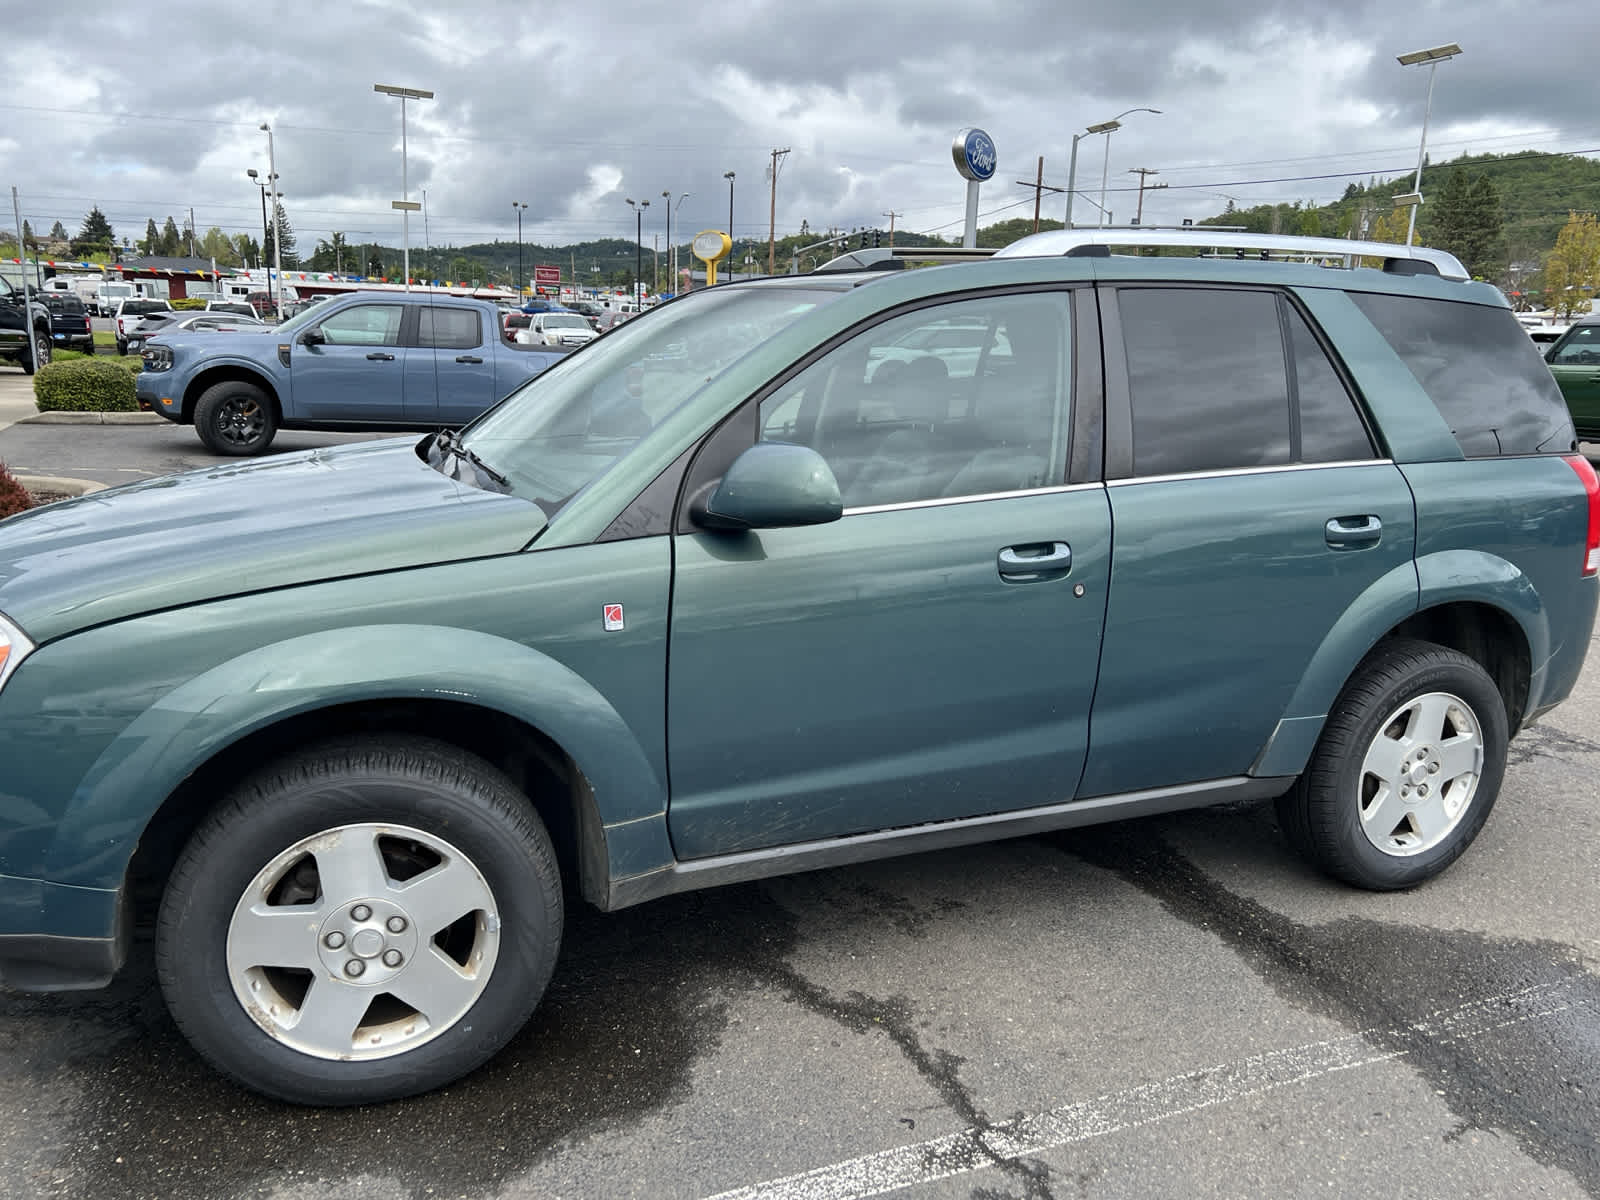 Used 2007 Saturn VUE 3.5L with VIN 5GZCZ63497S832728 for sale in Roseburg, OR